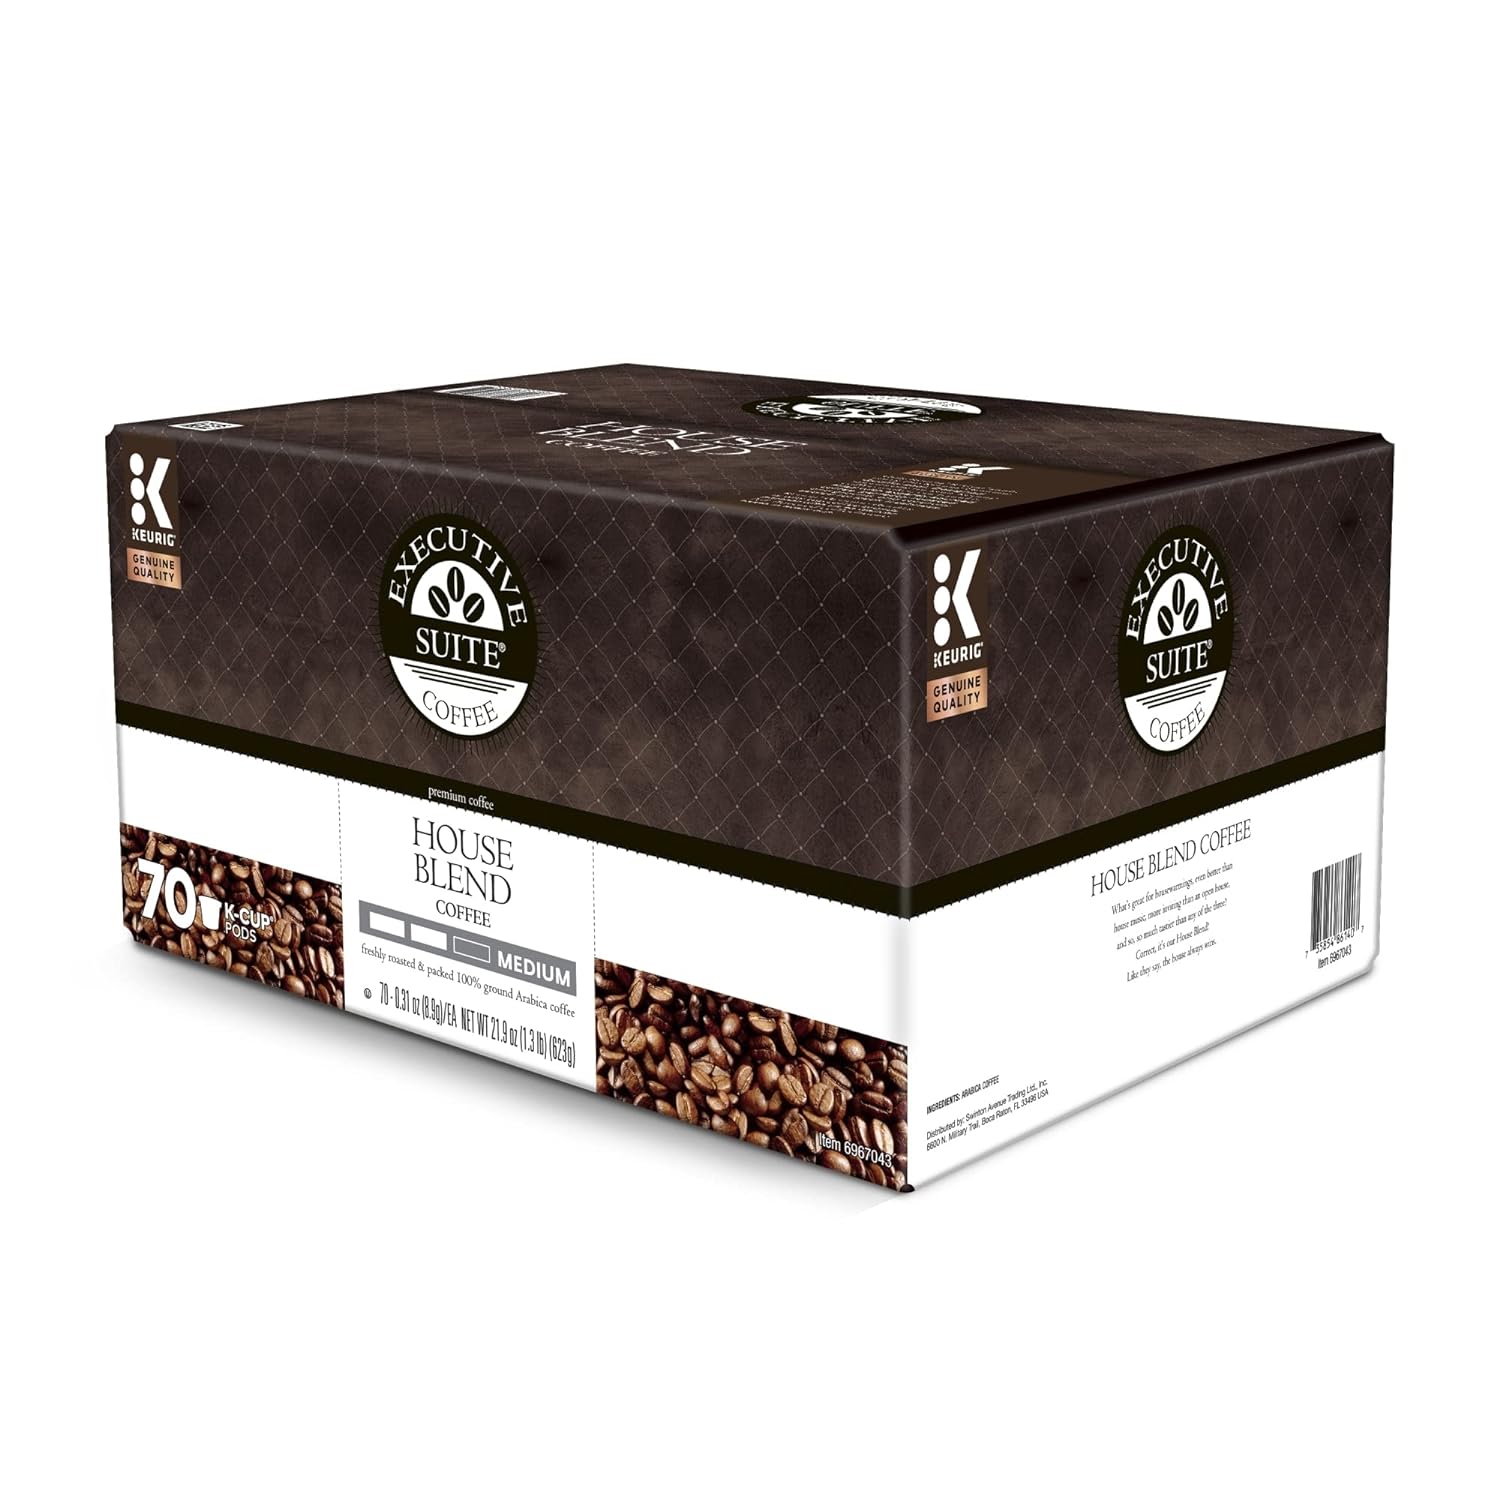 Executive Suite House Blend Coffee Pods for Keurig K-Cup Brewers, Box of 70 Pods